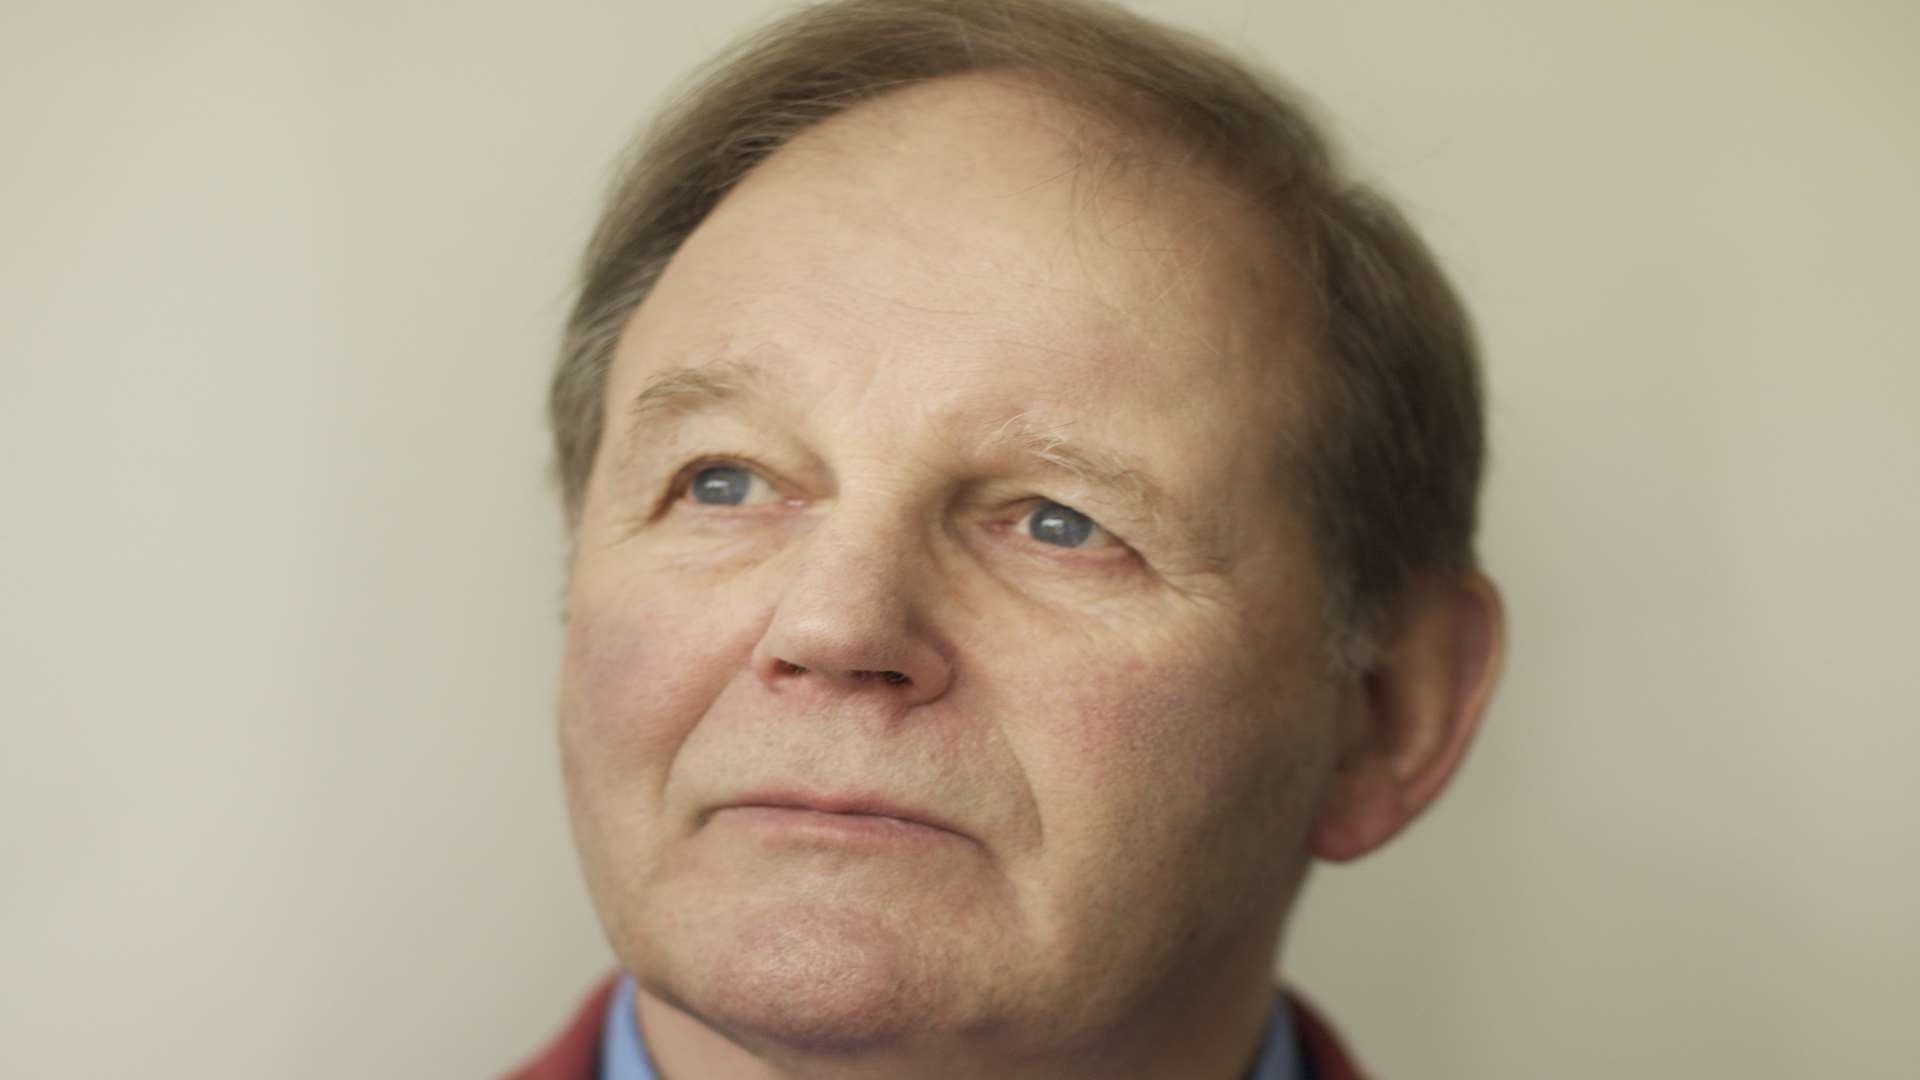 Michael Morpurgo, whose book War Horse was adapted for the stage